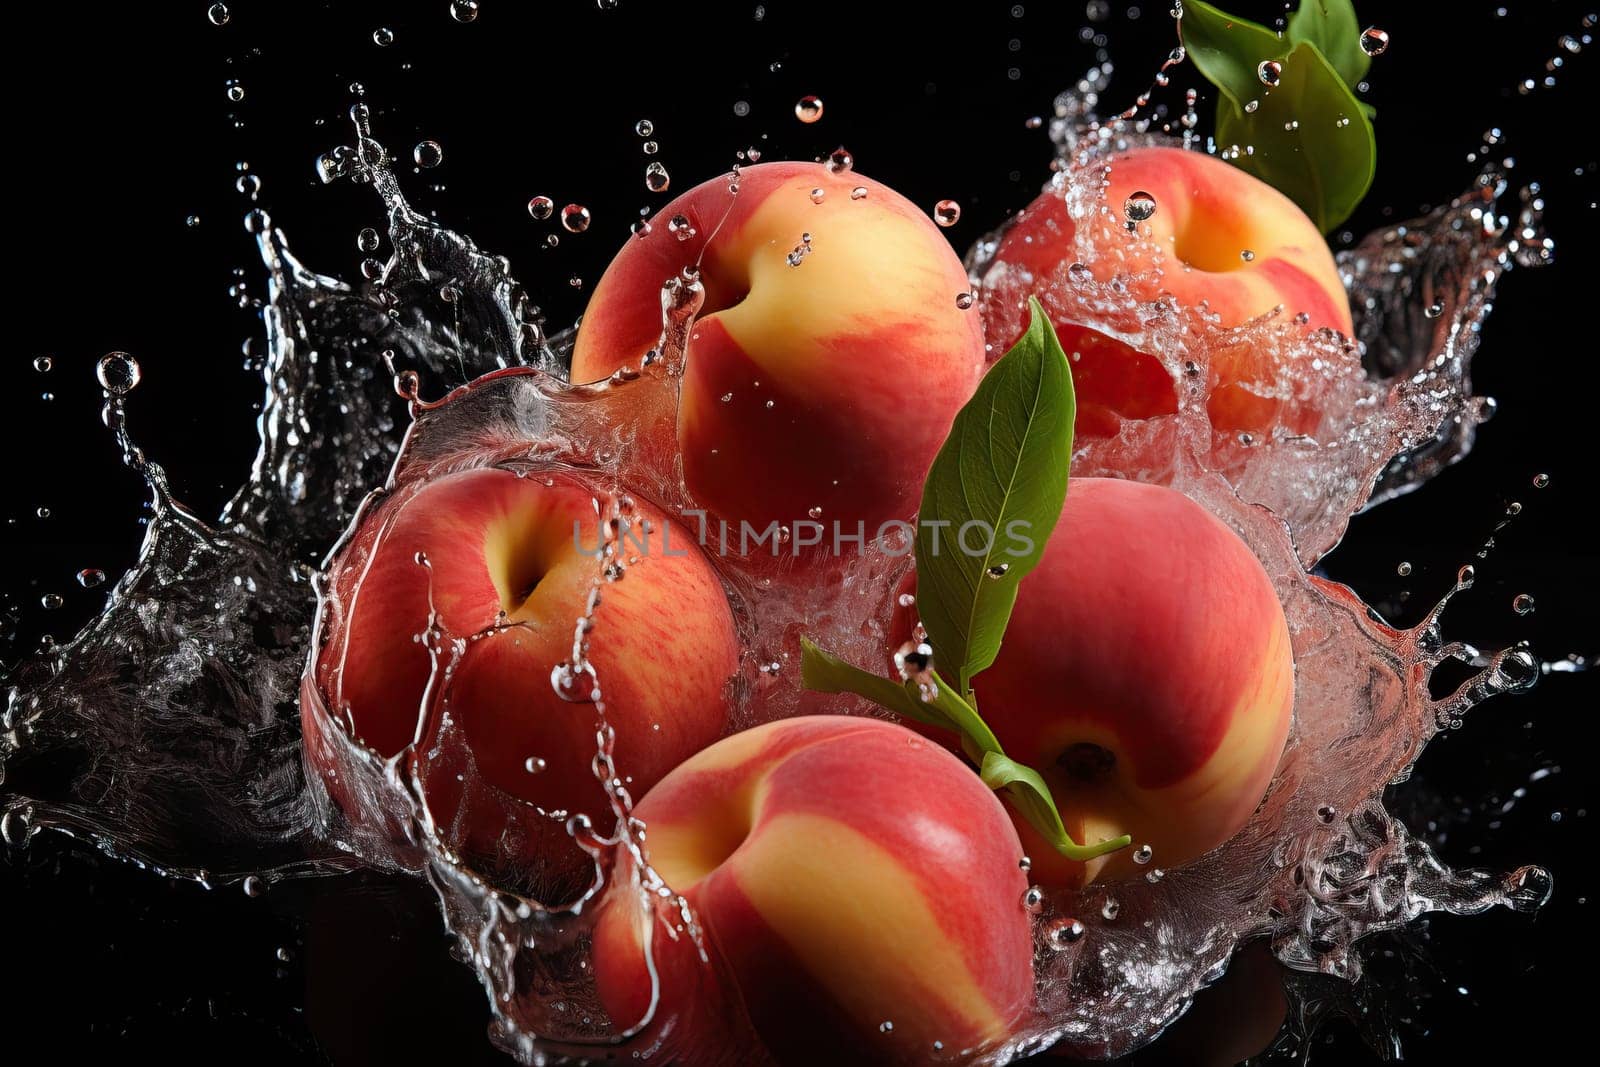 Nectarine in water with bubbles on black background, water splashes from fruit falling into water. by Niko_Cingaryuk